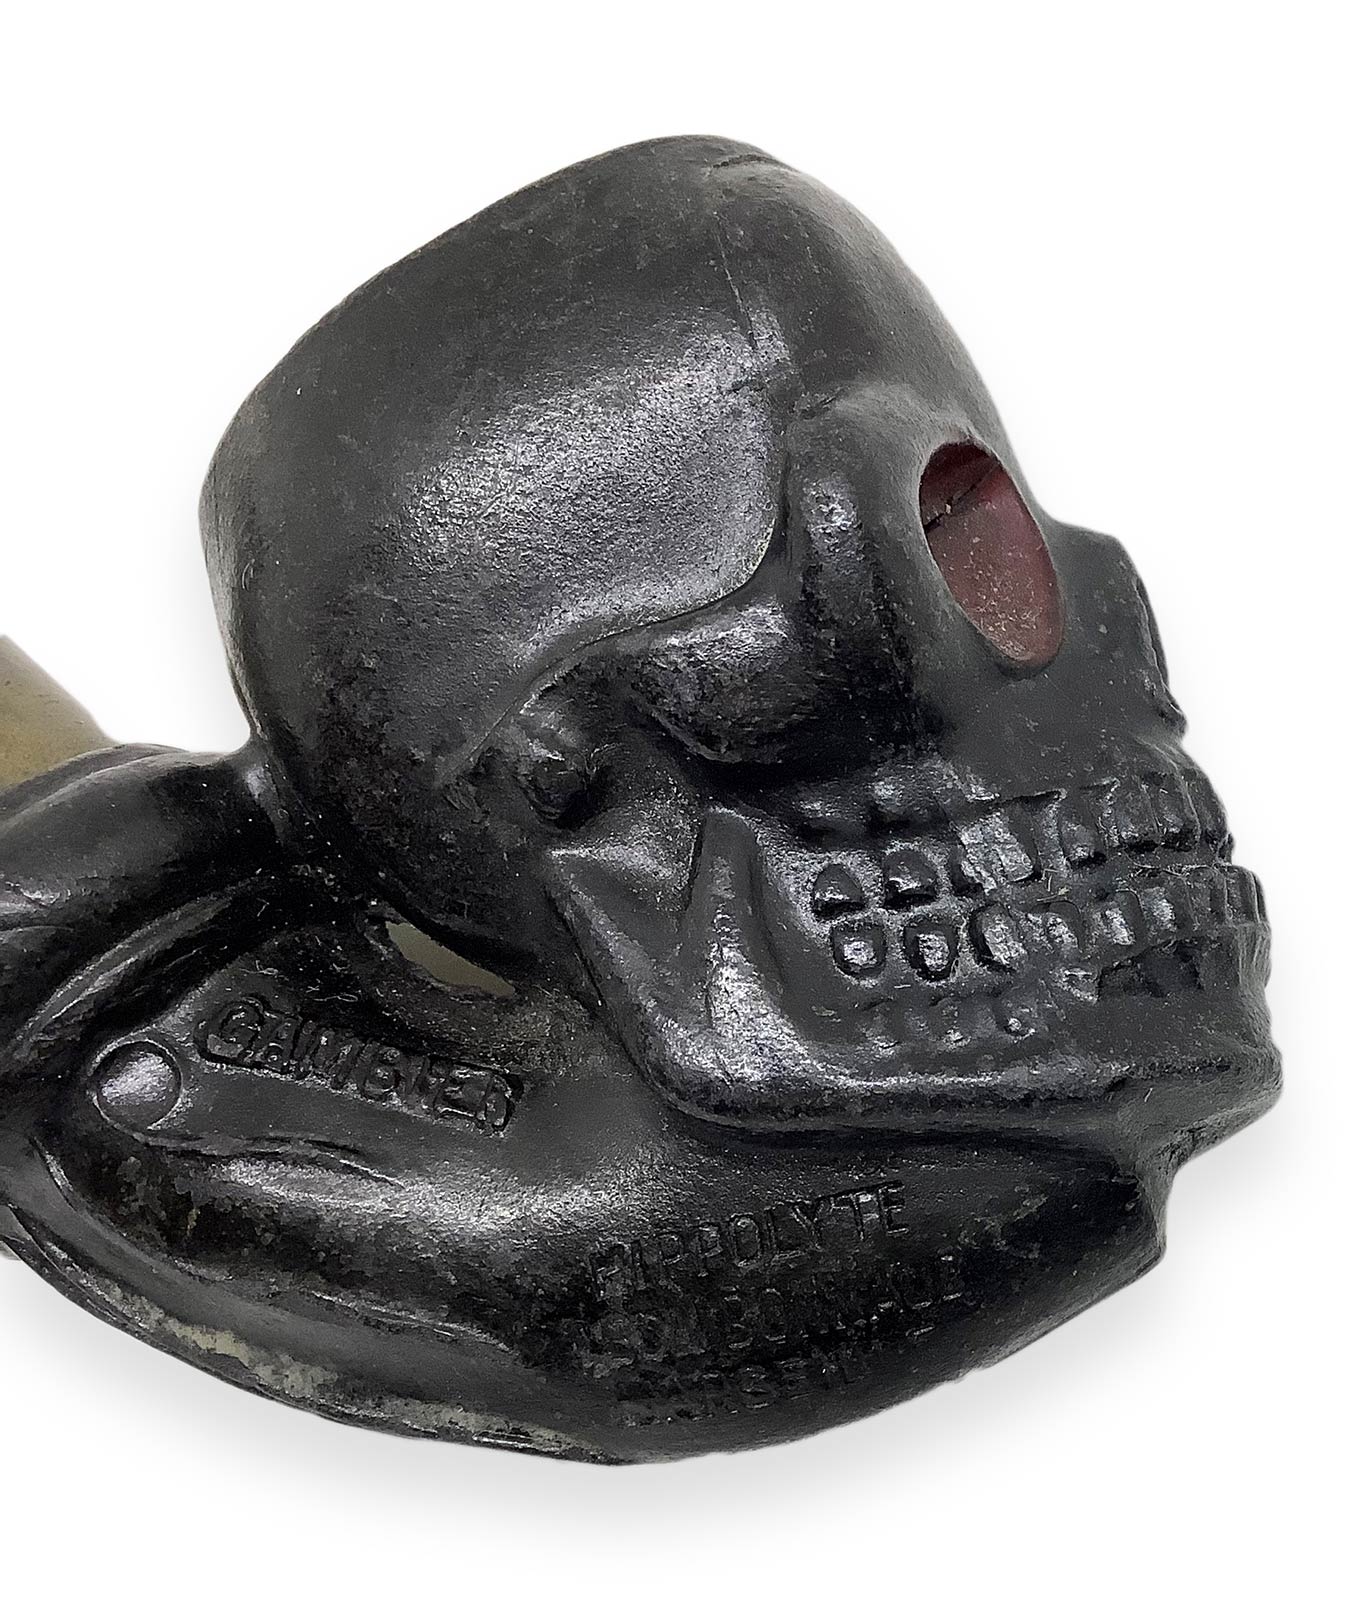 Pipe "Skull" of Gambier - Marseille, France. Early 1900s. Pipe with clay tobacco chamber and shank, - Image 4 of 6